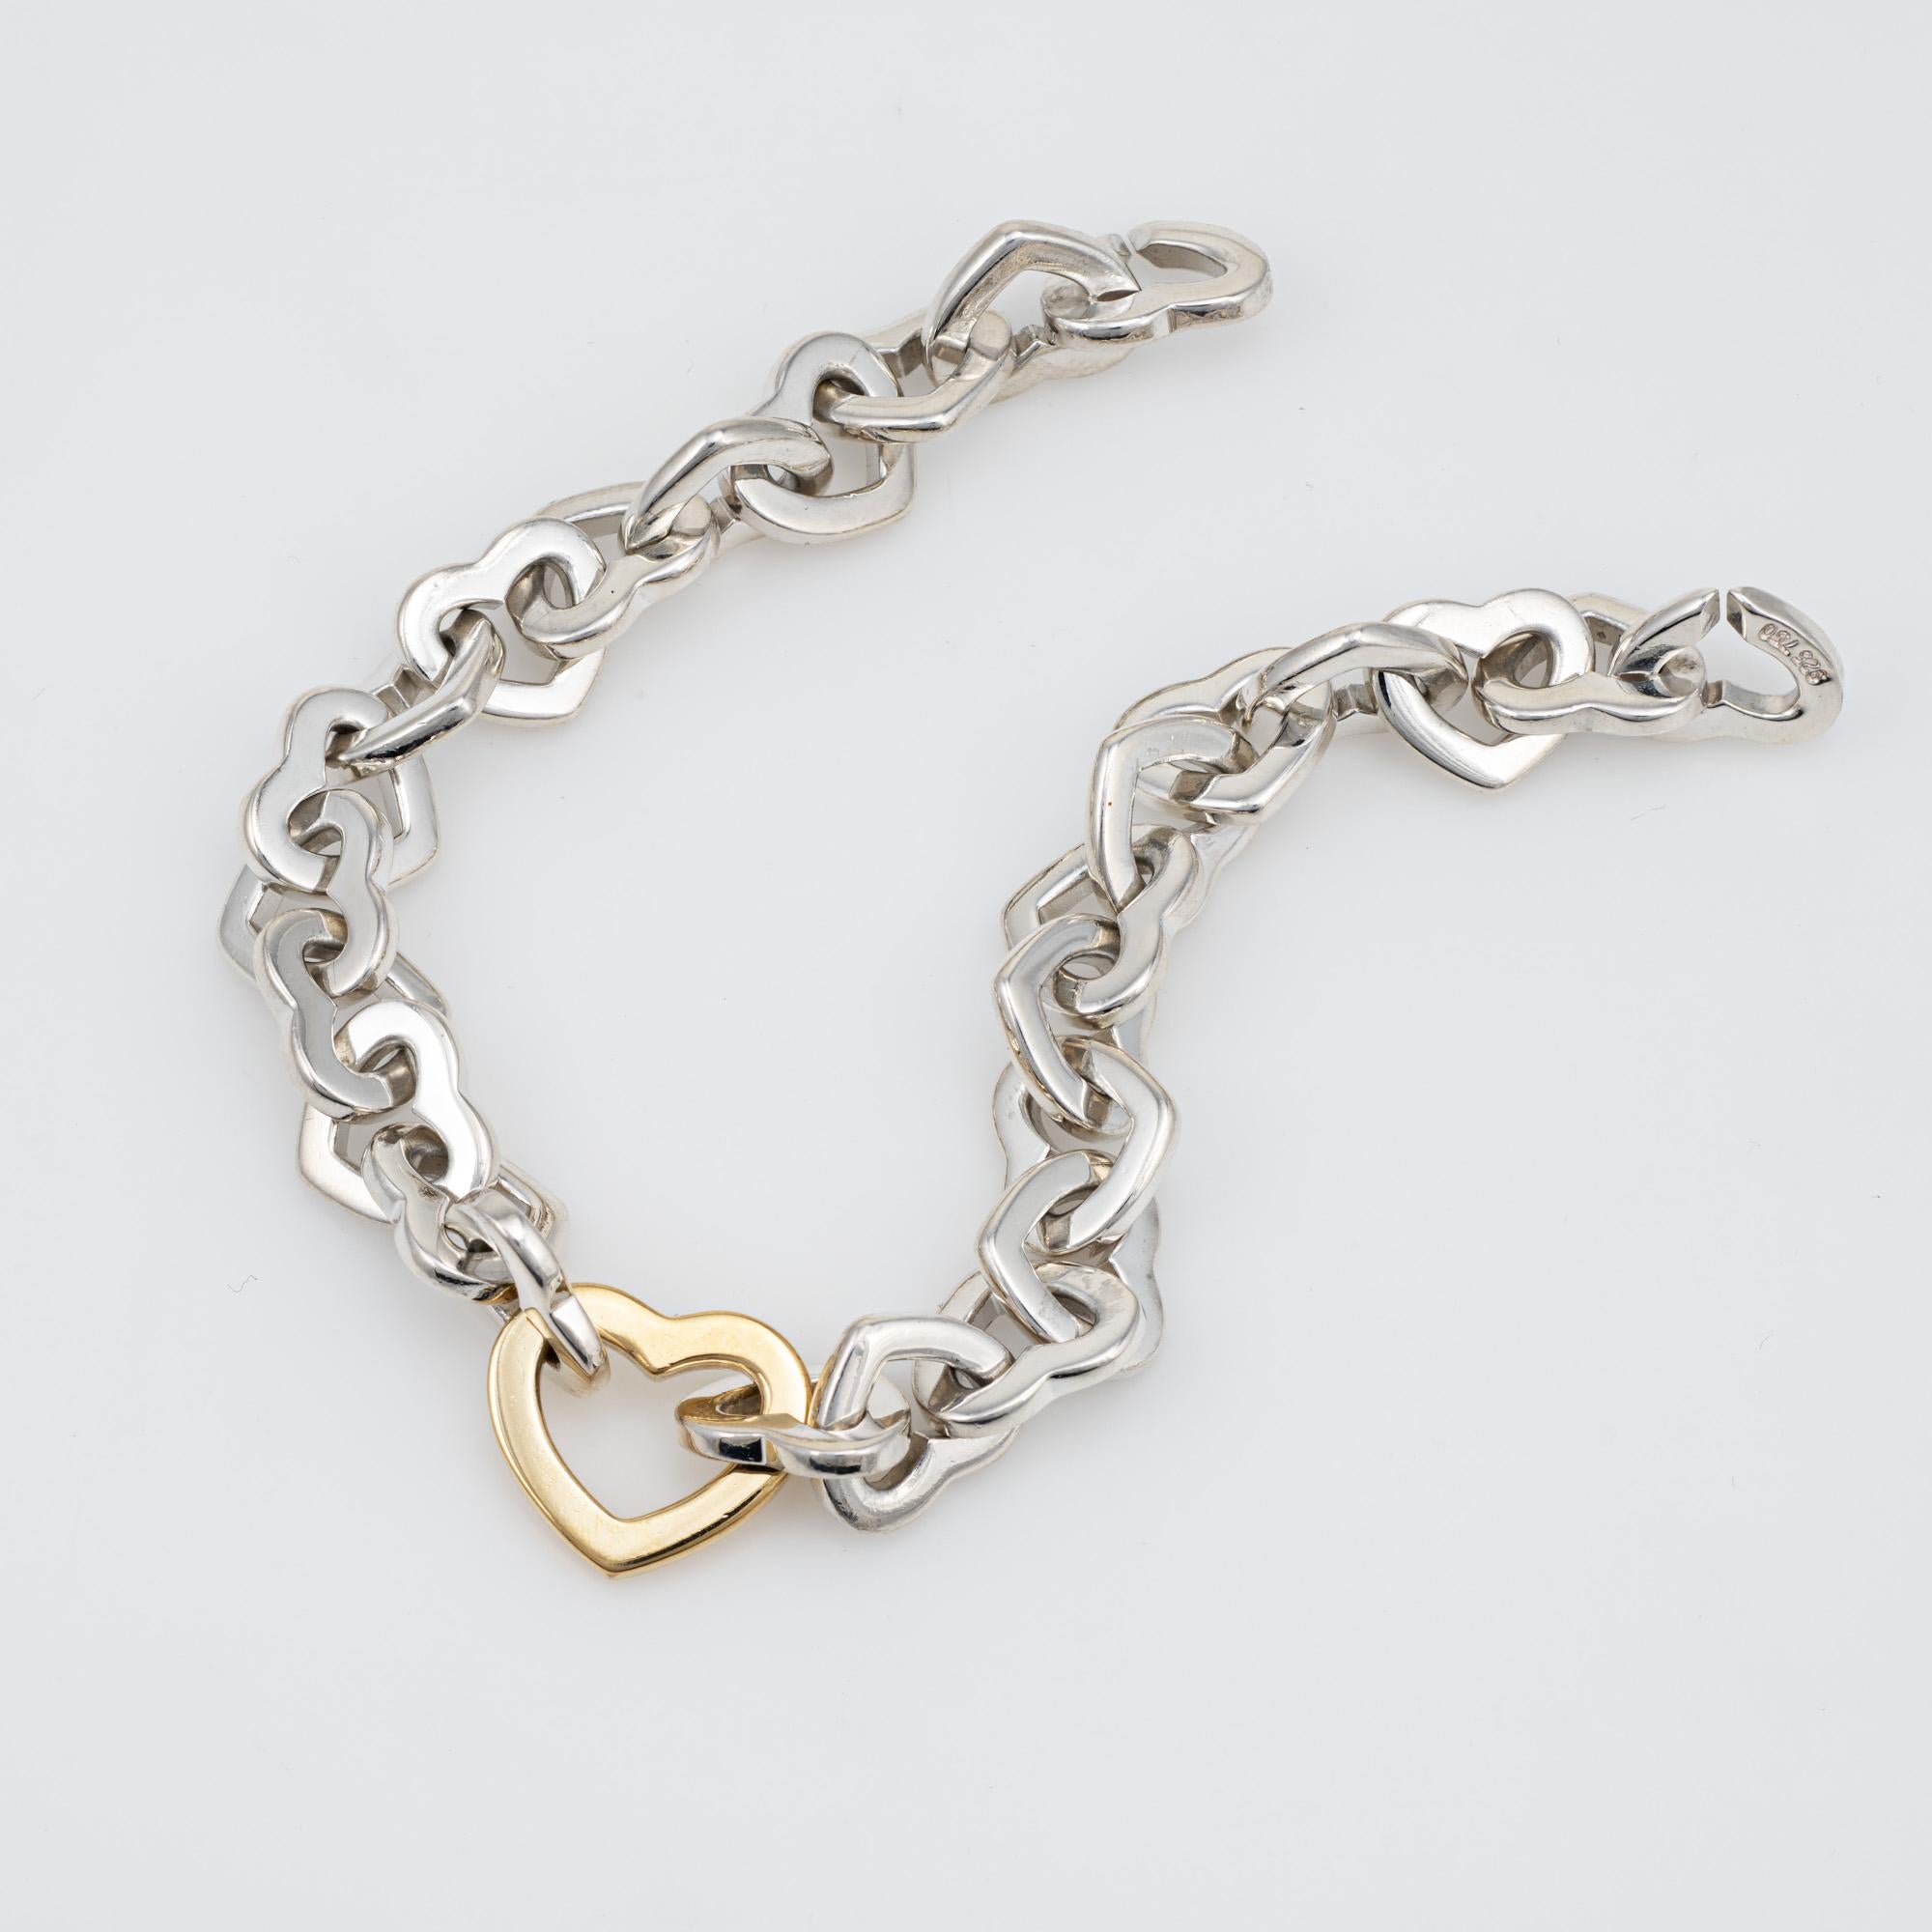 Stylish and finely detailed vintage Tiffany & Co heart link bracelet, crafted in sterling silver & 18 karat yellow gold.  

The bracelet features interlocking heart shaped links in sterling silver, with a larger 18k yellow gold heart link to the